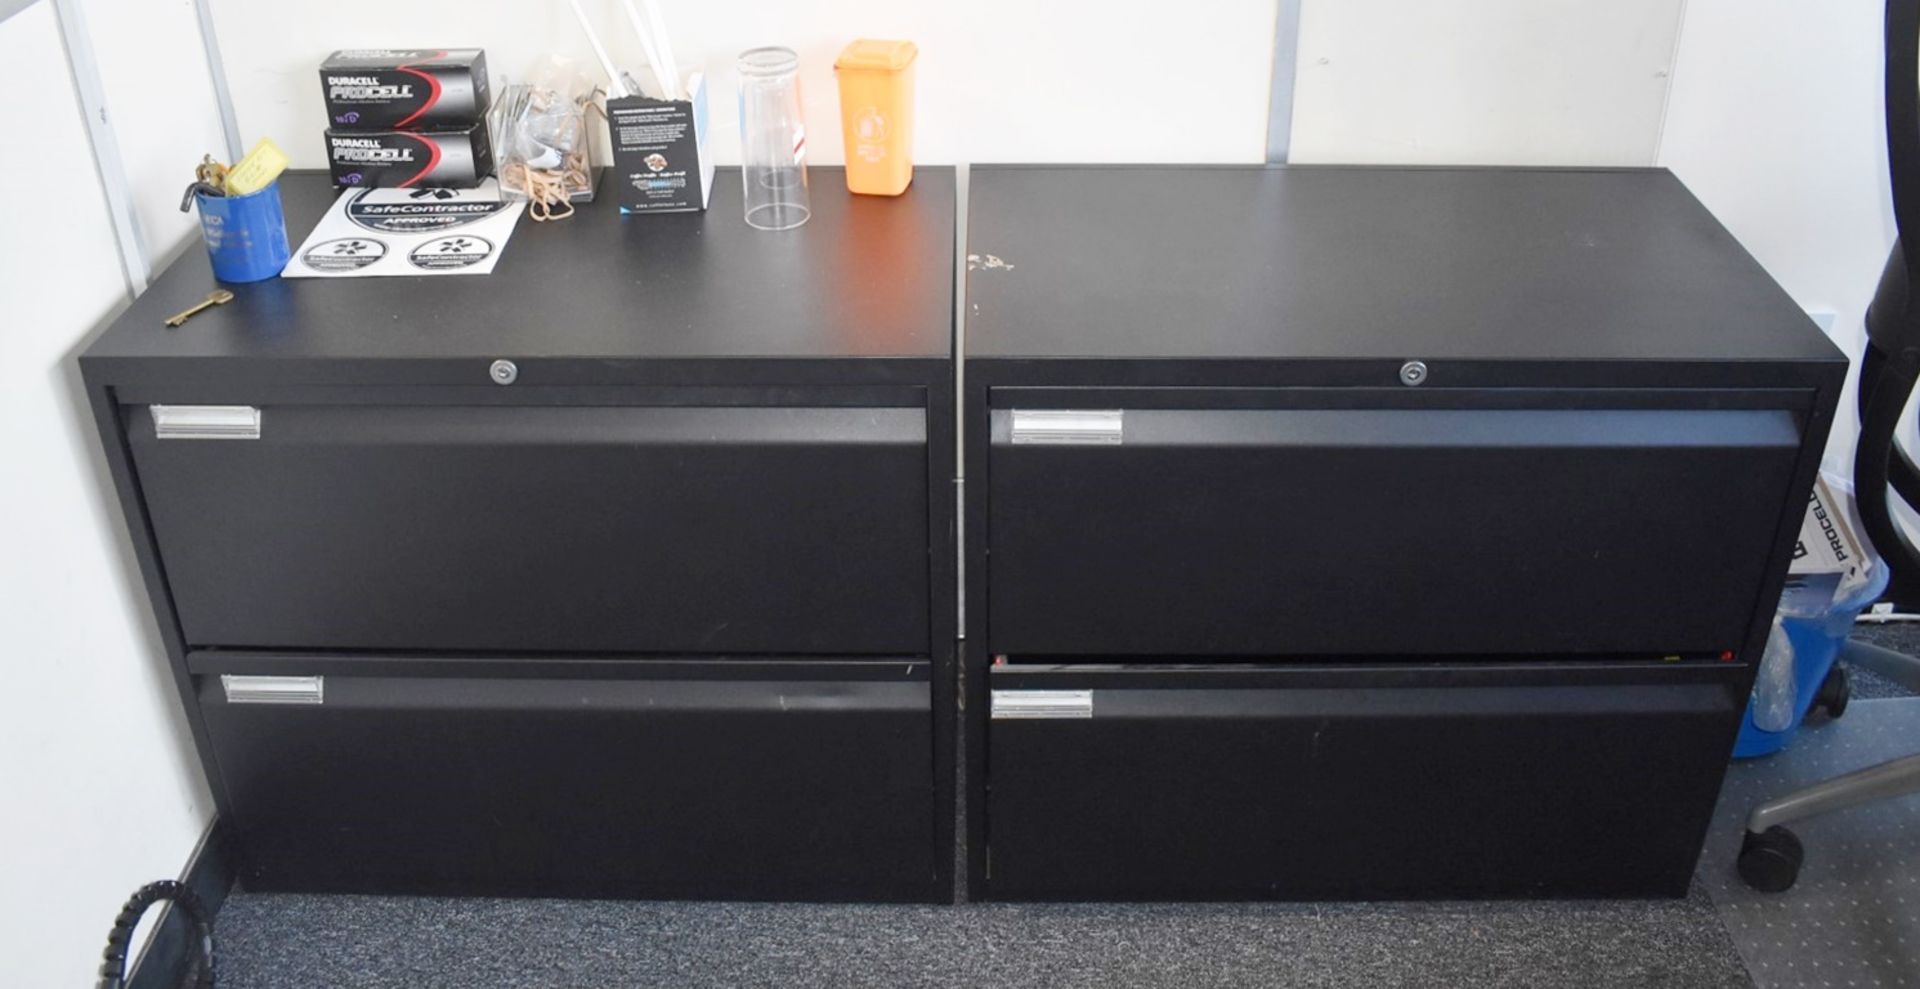 1 x 2 Drawer Metal Filing Cabinets in Black - Size: H70  x W80 x D47 cms - Ref: C201 - CL816 - - Image 4 of 5